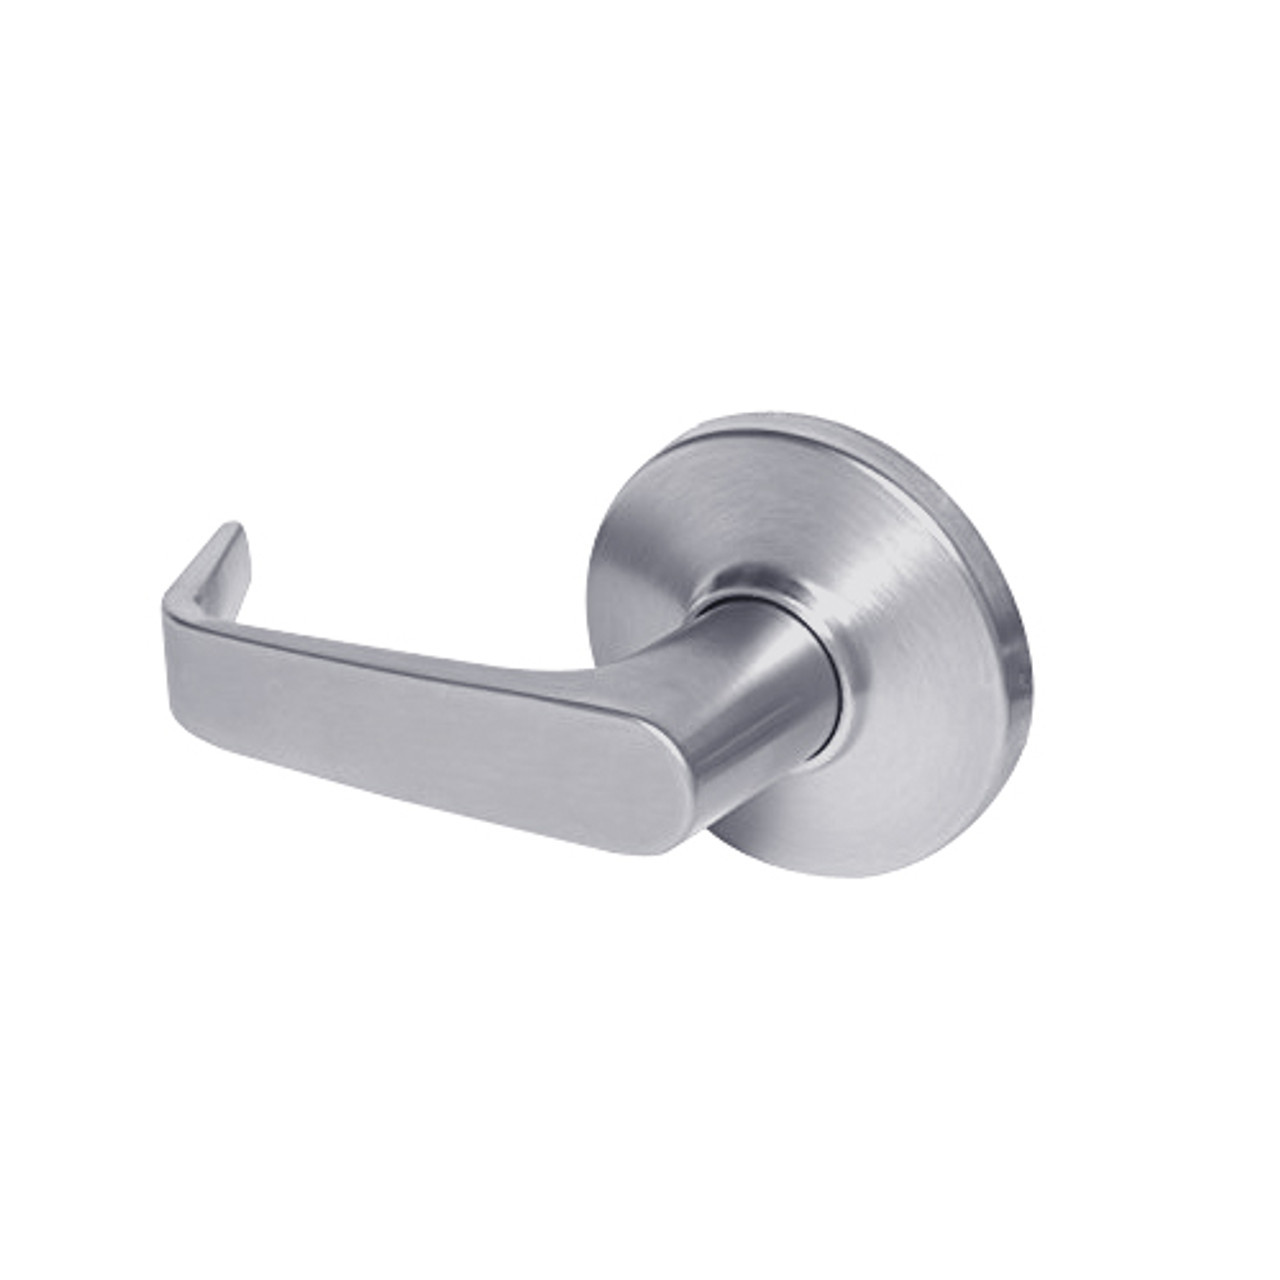 9K30Y15DSTK626LM Best 9K Series Exit Heavy Duty Cylindrical Lever Locks with Contour Angle with Return Lever Design in Satin Chrome